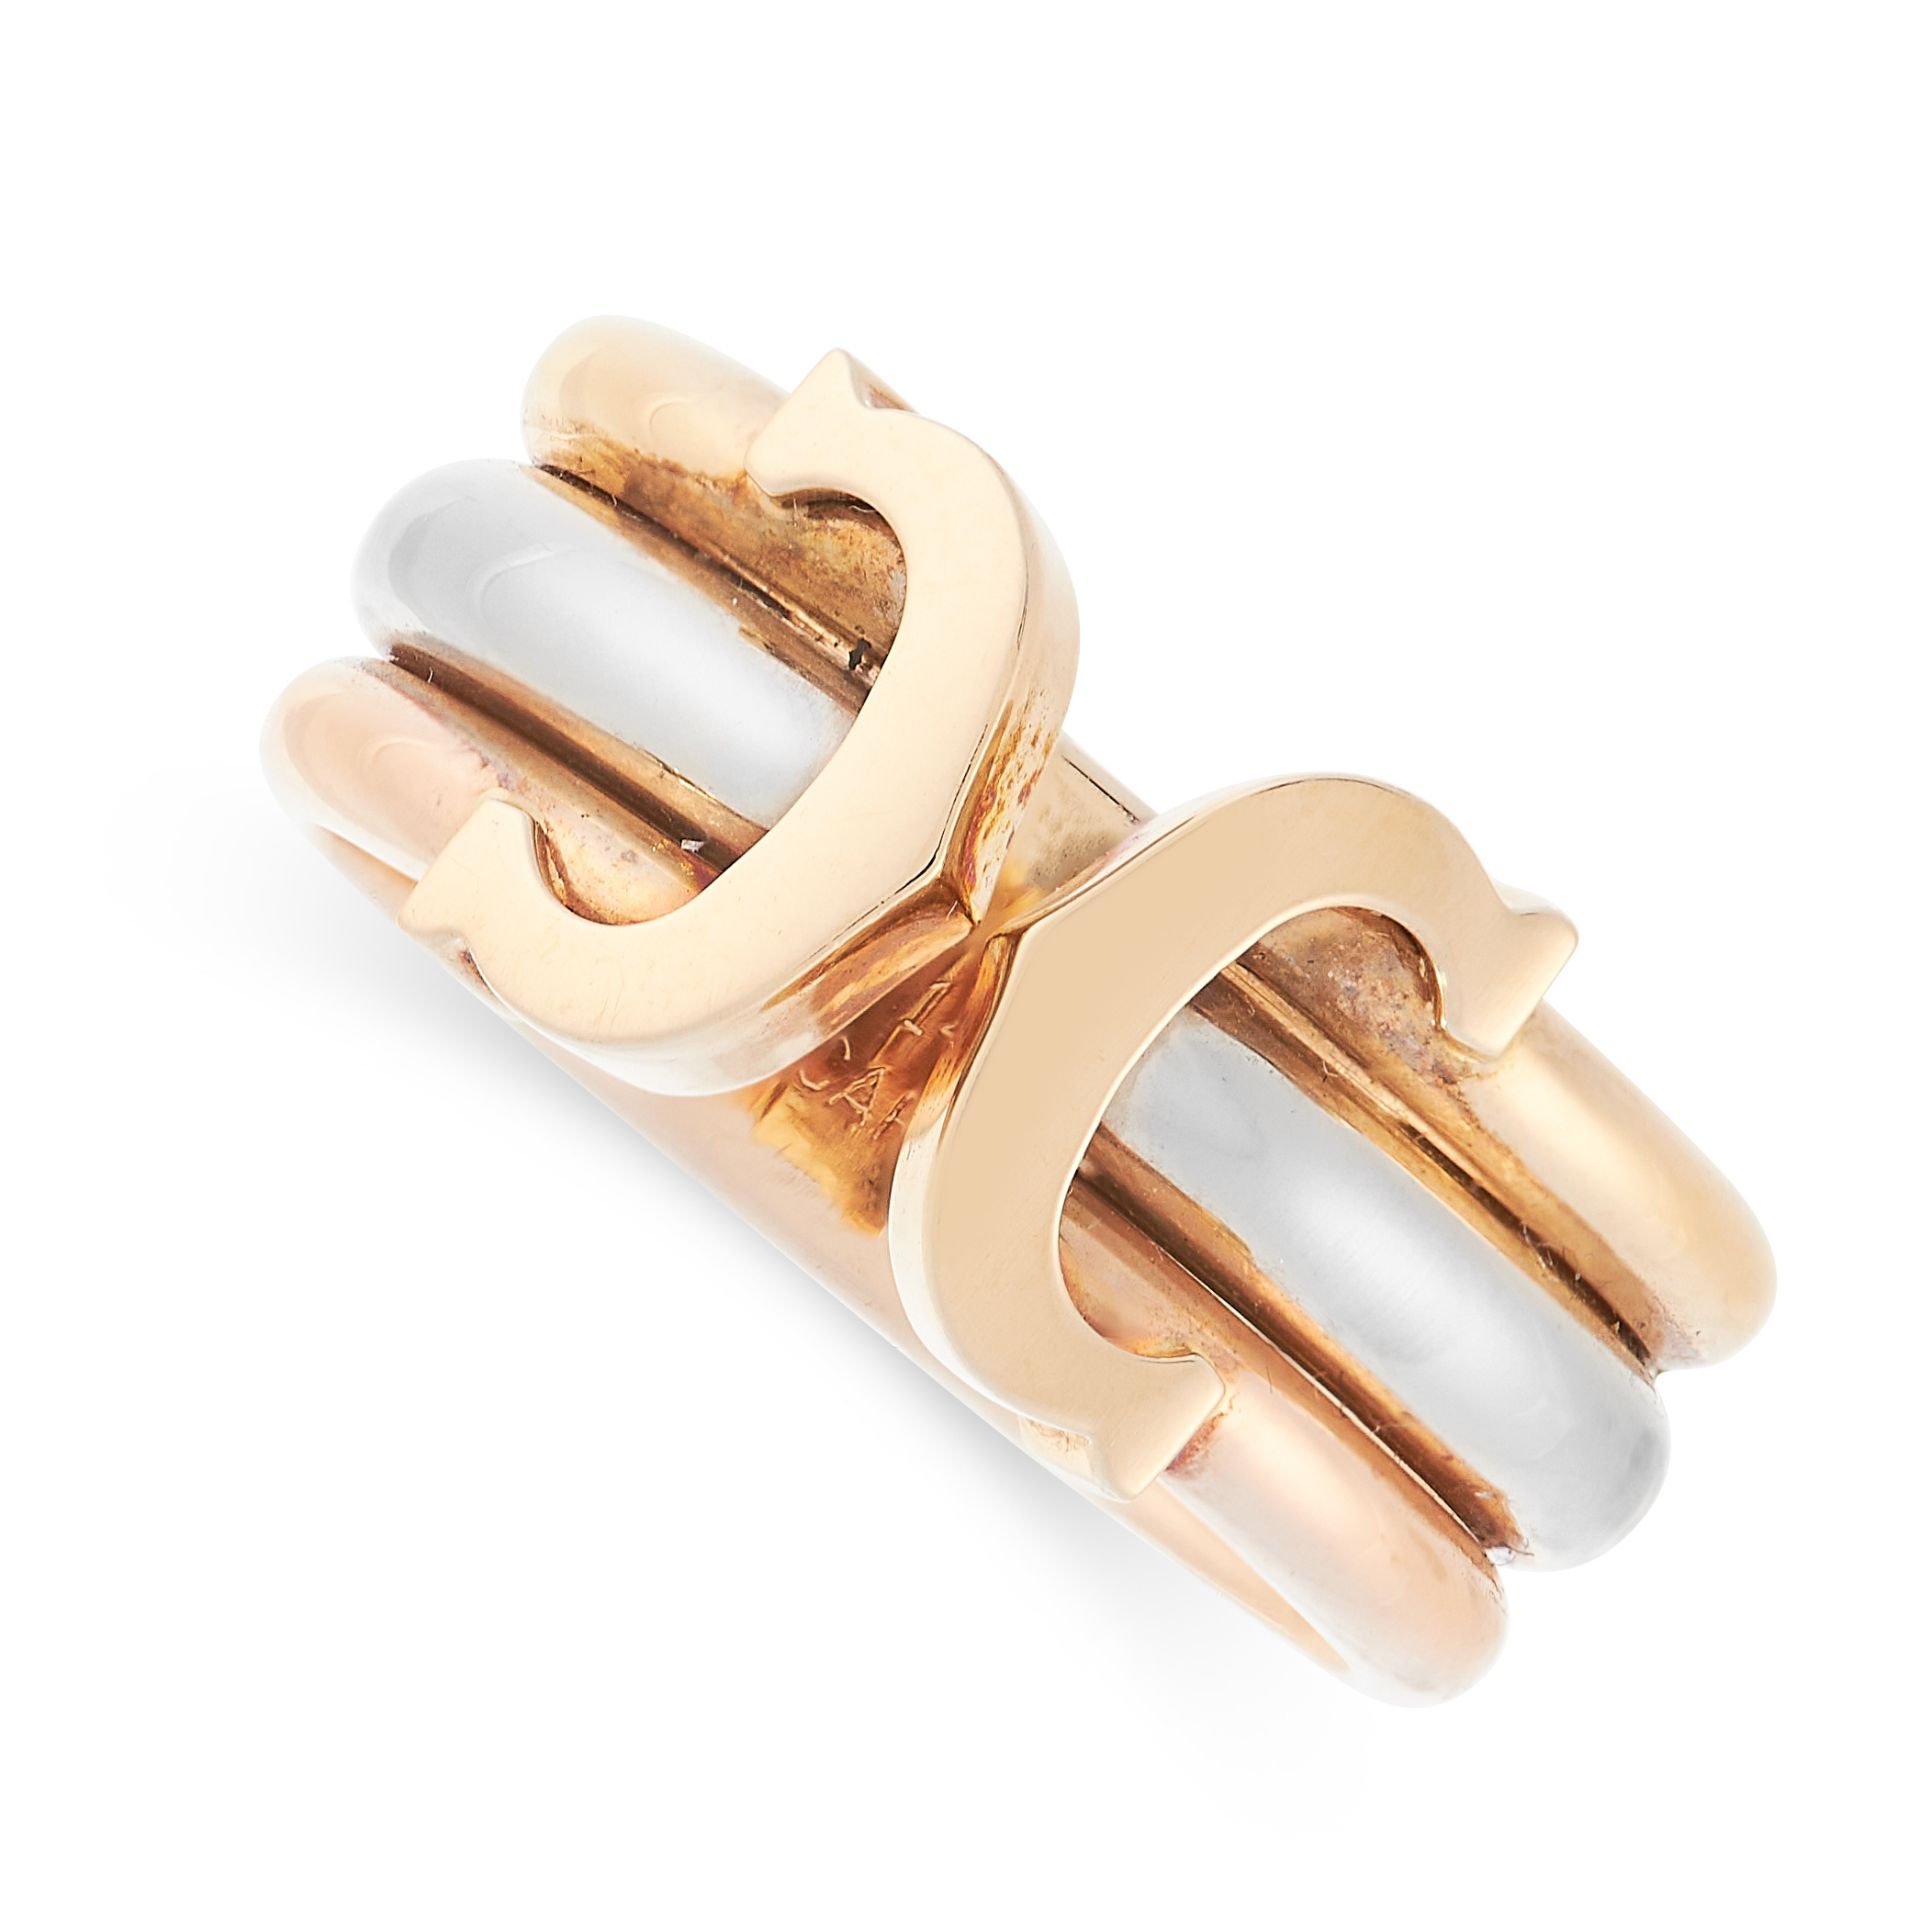 C DE CARTIER TRINITY RING, CARTIER in 18ct white, yellow and rose gold, formed of a reeded band in